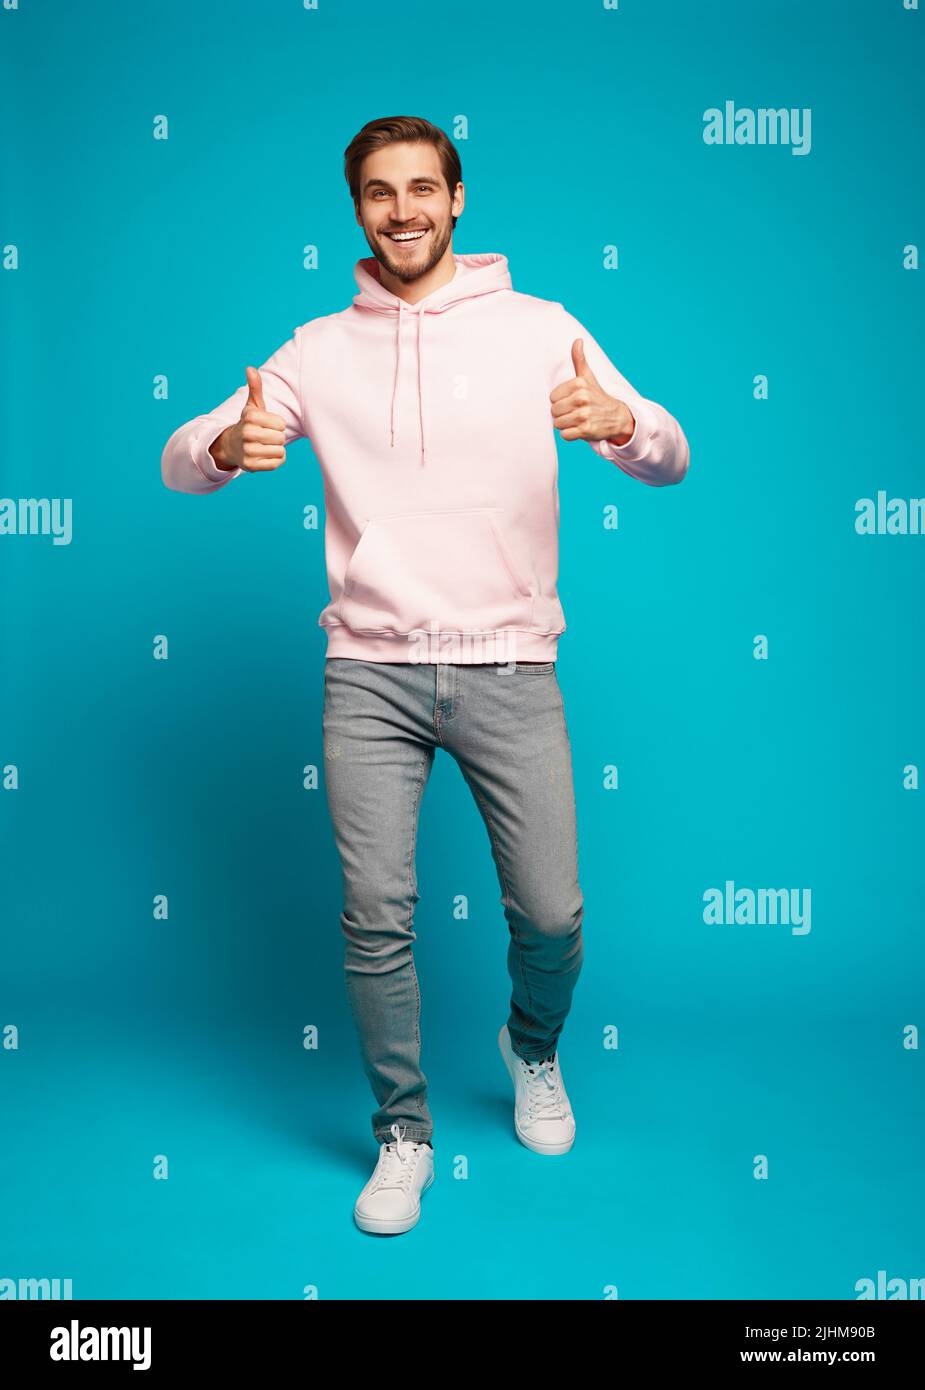 Full size photo of cheerful man smiling and showing thumbs up at camera isolated over light blue background Stock Photo